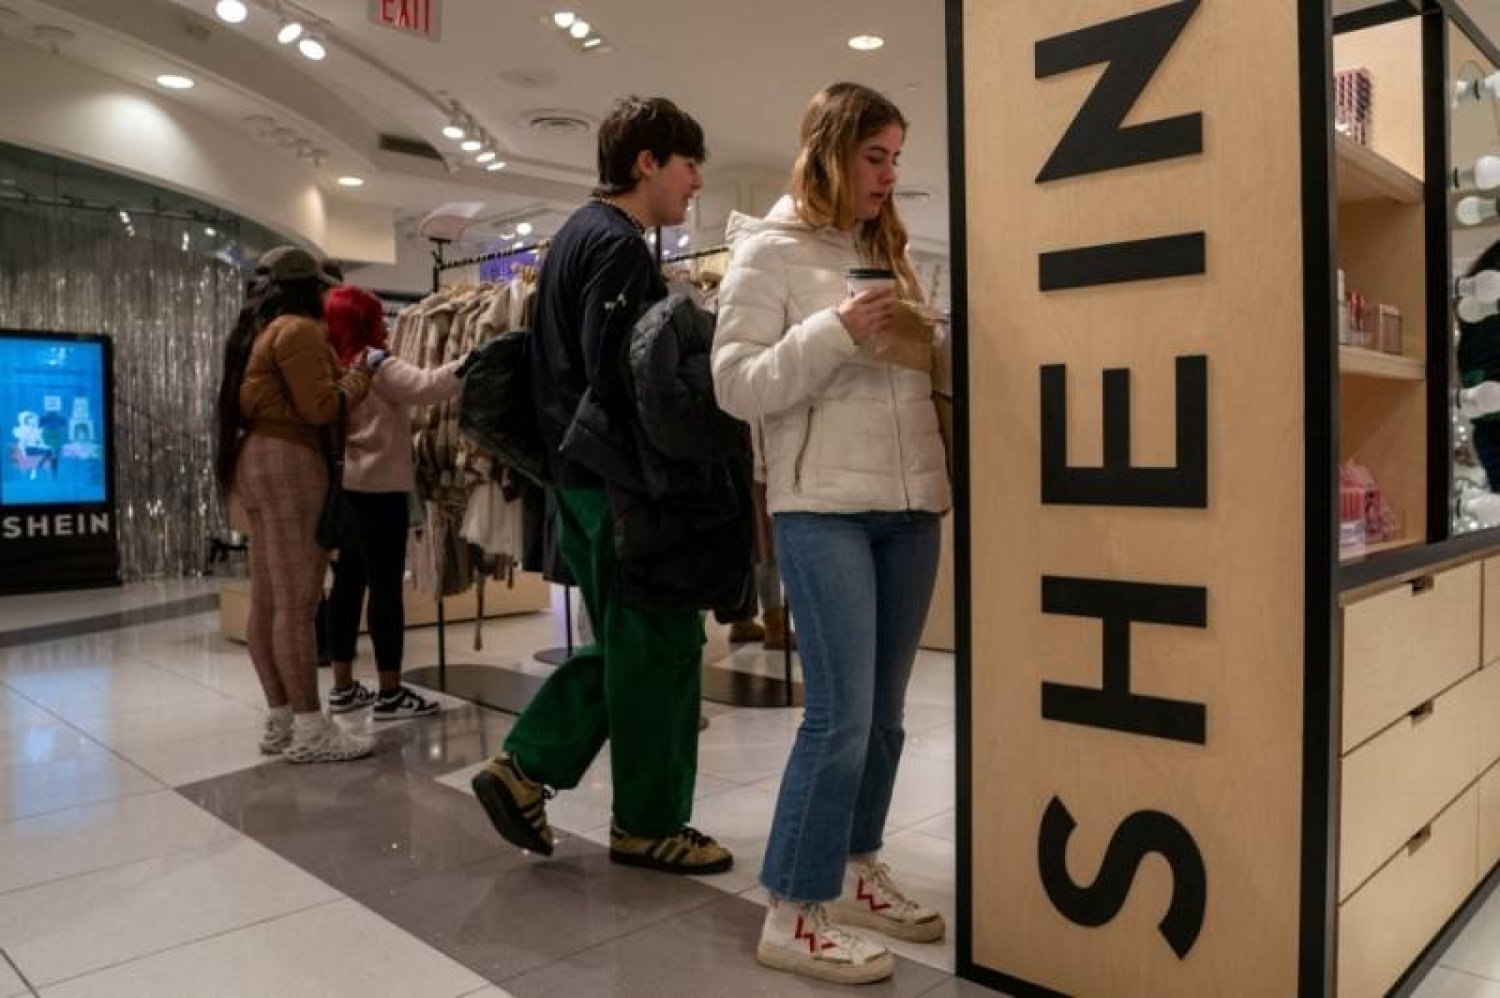 The ultra-flexible supply chain has allowed Shein to create a different business model than established fast-fashion players like Zara and H&M, which pioneered shorter production timelines but still largely rely on predicting shoppers’ preferences. Reuters pic